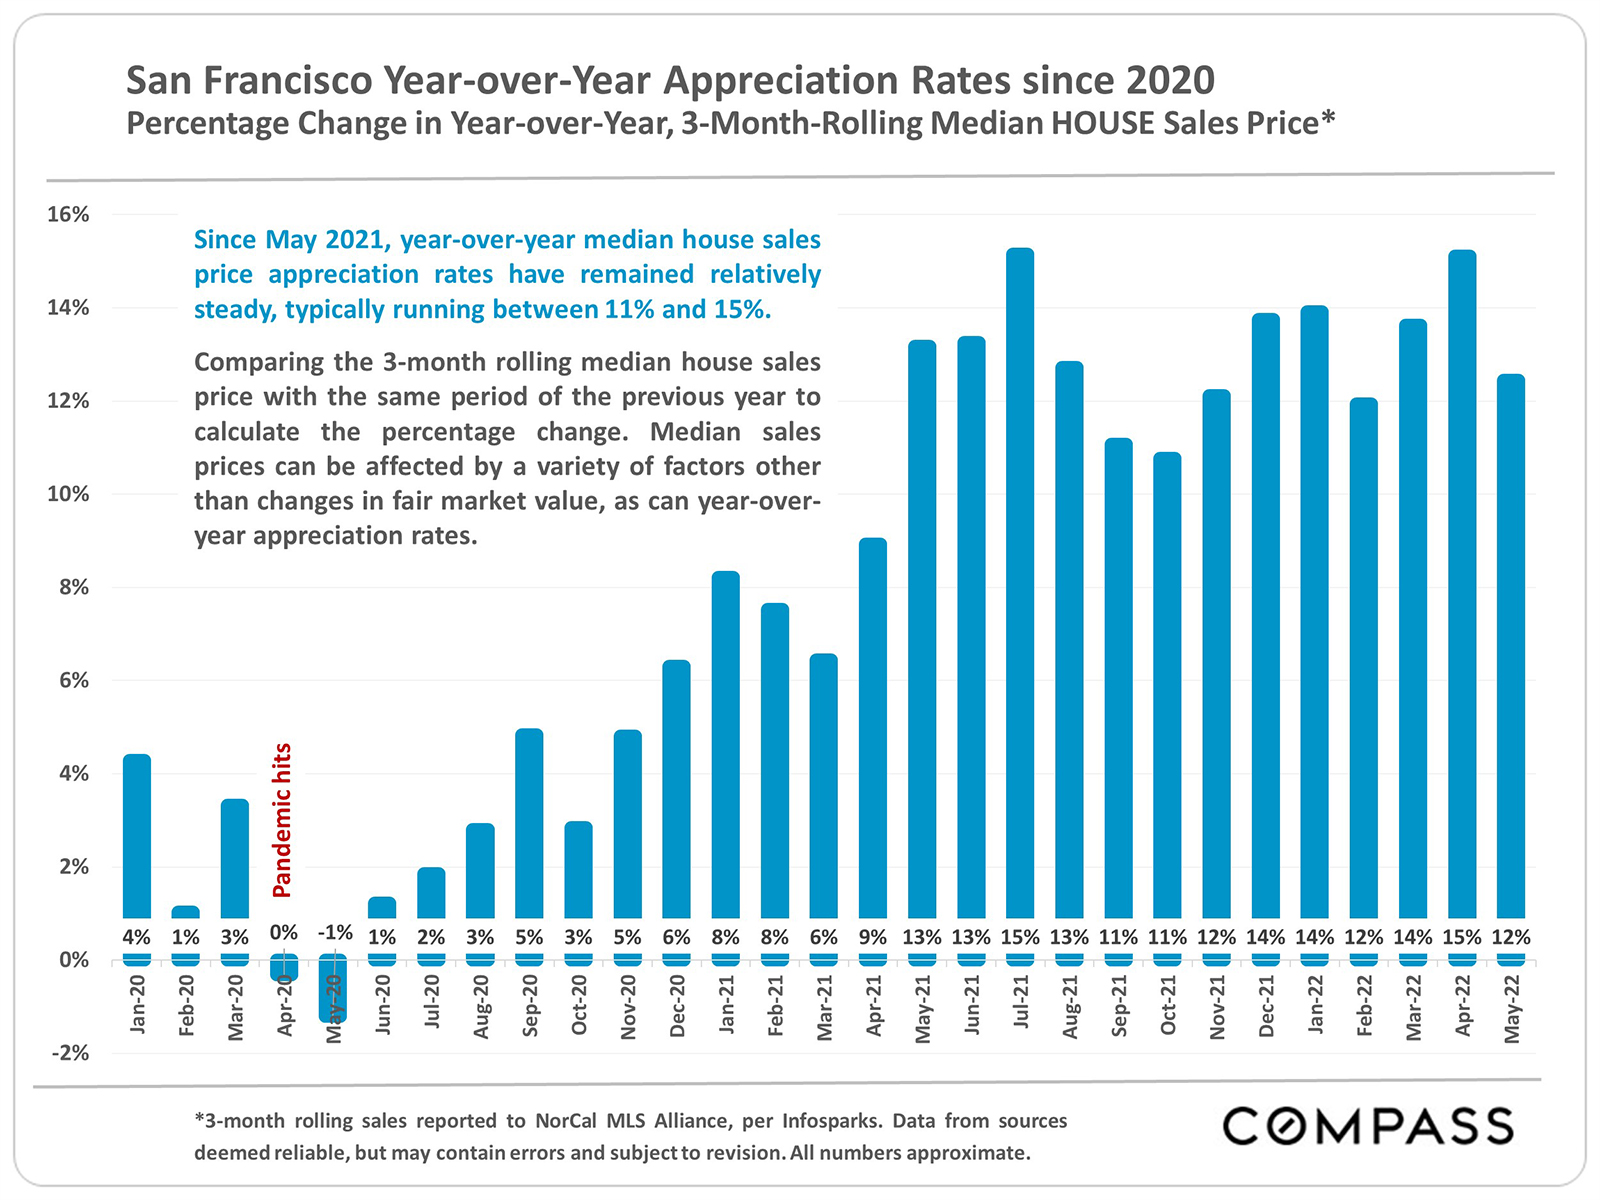 San Francisco Year over Year Appreciation Rates Since 2020